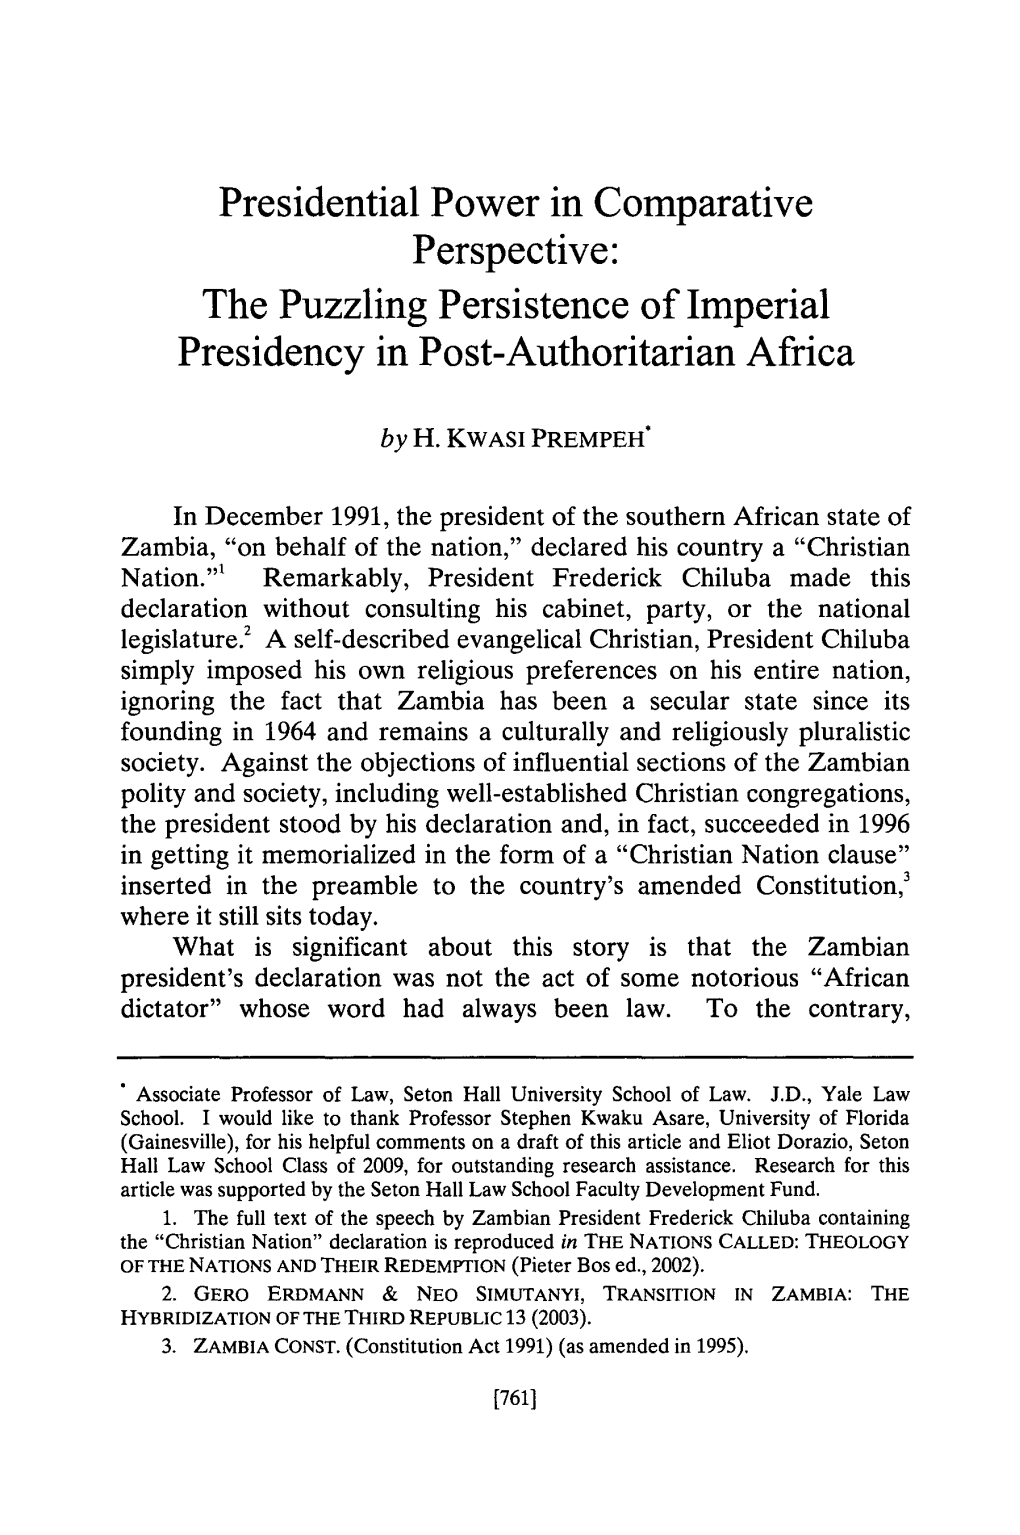 Presidential Power in Comparative Perspective: the Puzzling Persistence of Imperial Presidency in Post-Authoritarian Africa